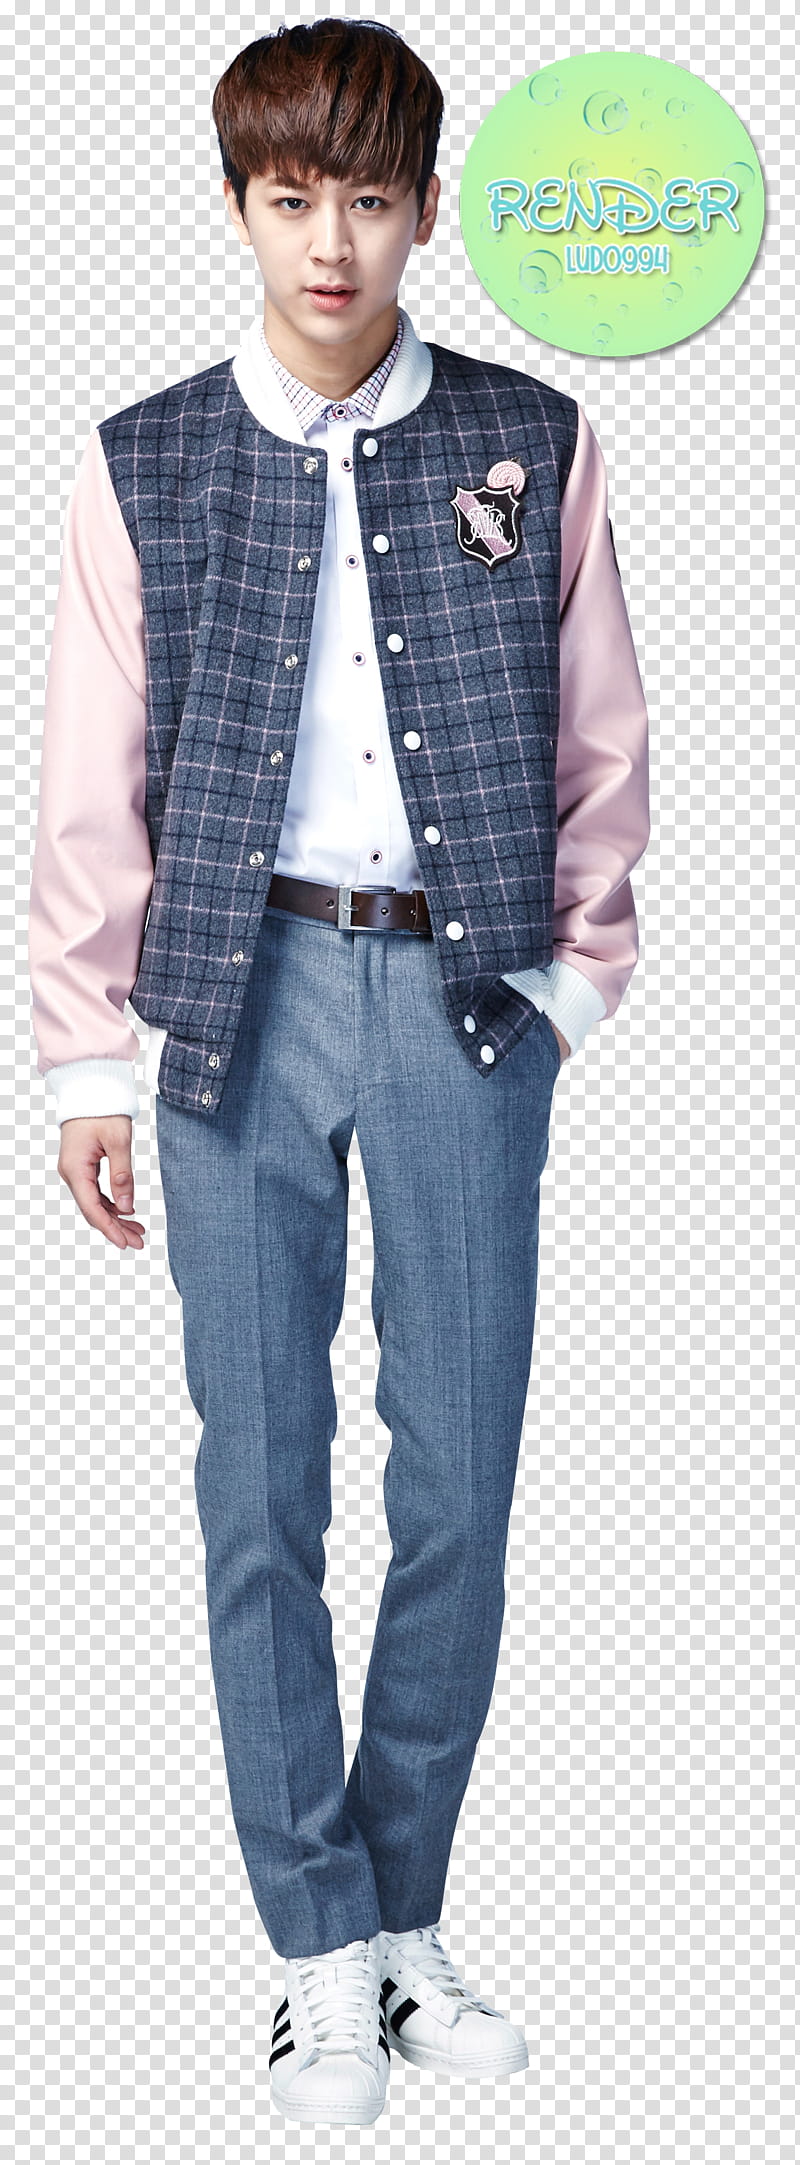 standing man wearing blue and gray letterman jacket and gray dress pants transparent background PNG clipart